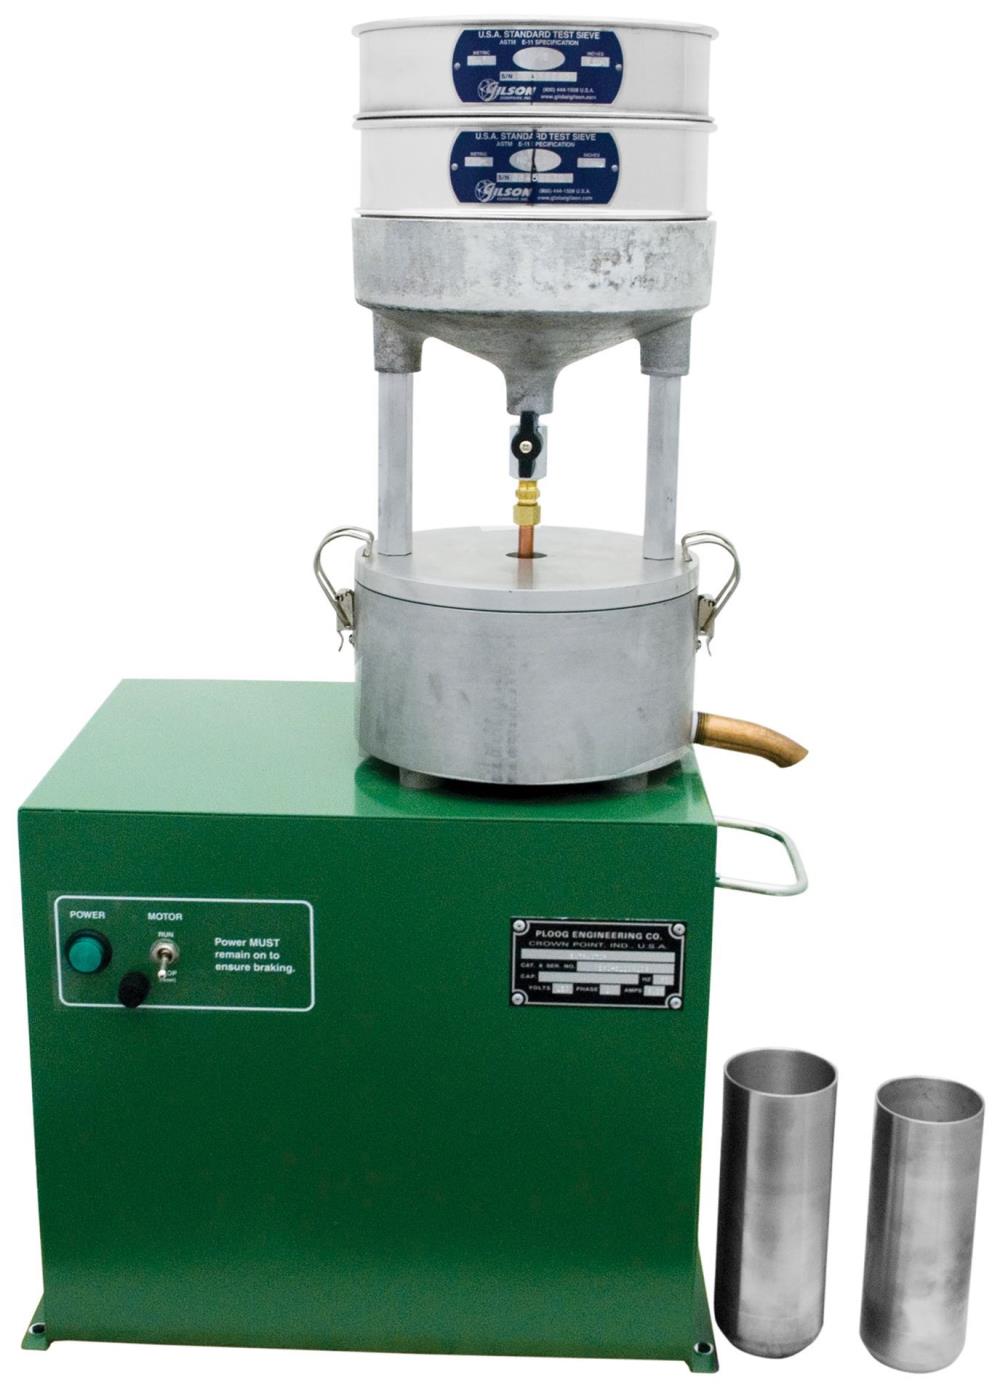 Filterless Centrifuge,Filterless Centrifuge,,Instruments and Controls/Inspection Equipment